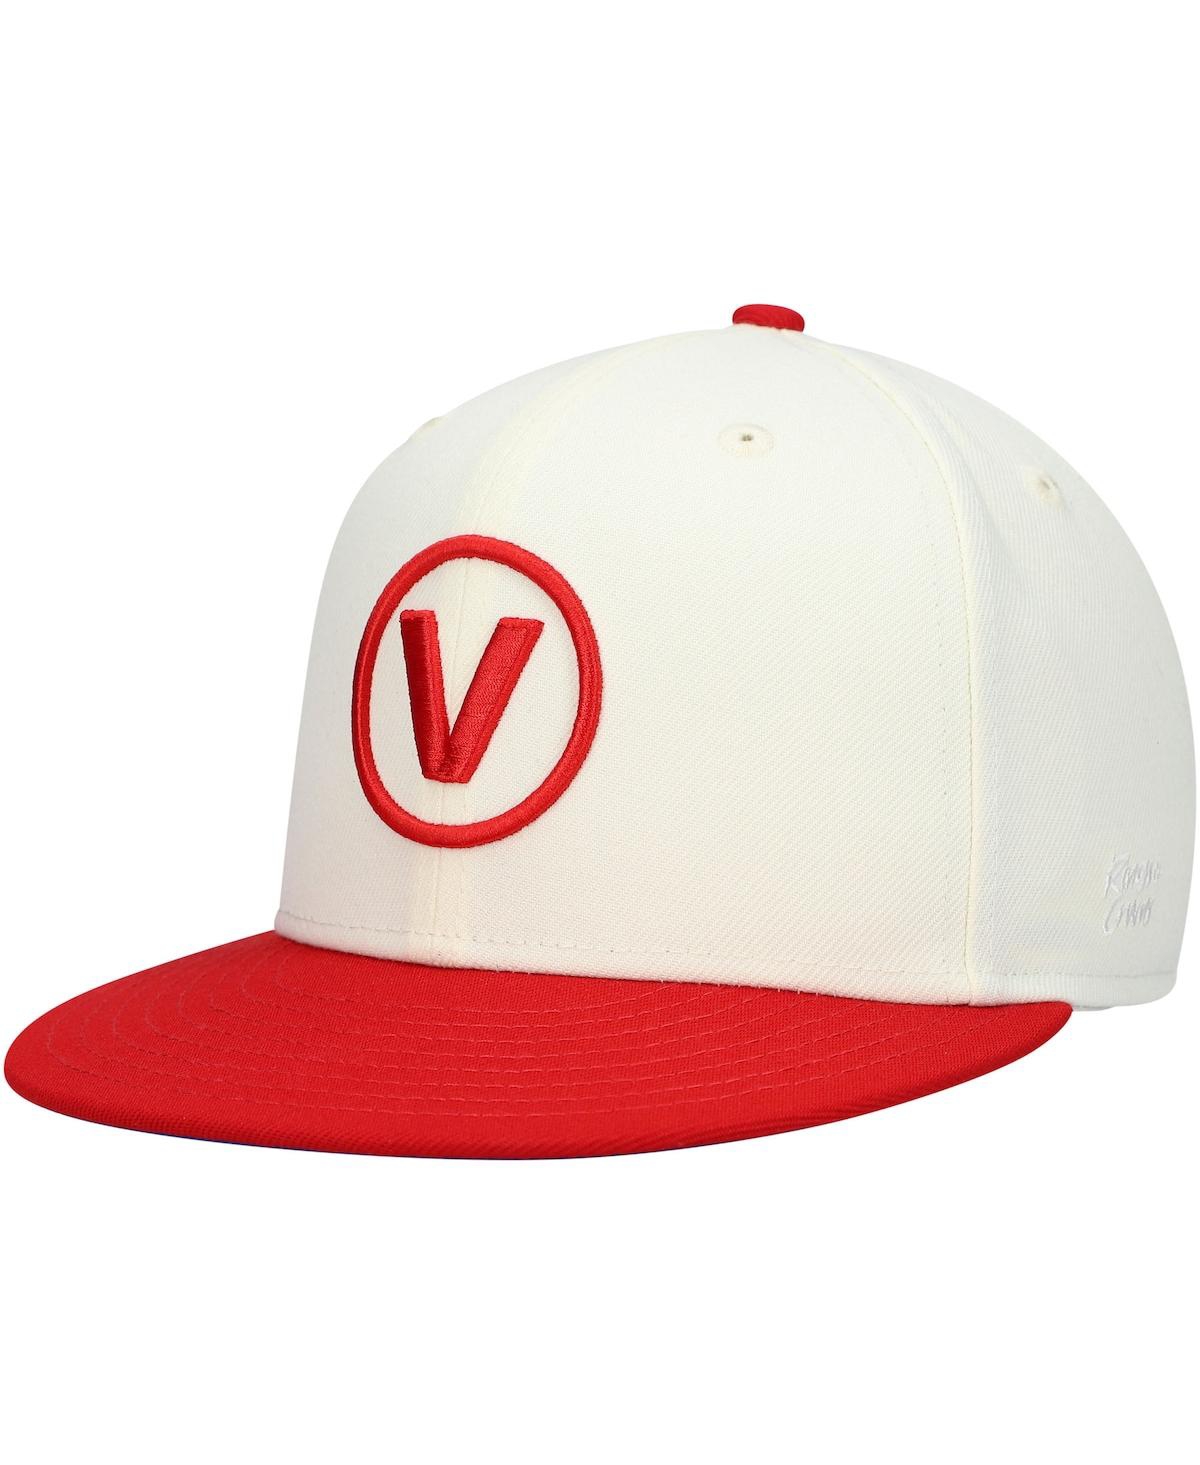 Shop Rings & Crwns Men's  Cream, Red Vargas Campeones Team Fitted Hat In Cream,red